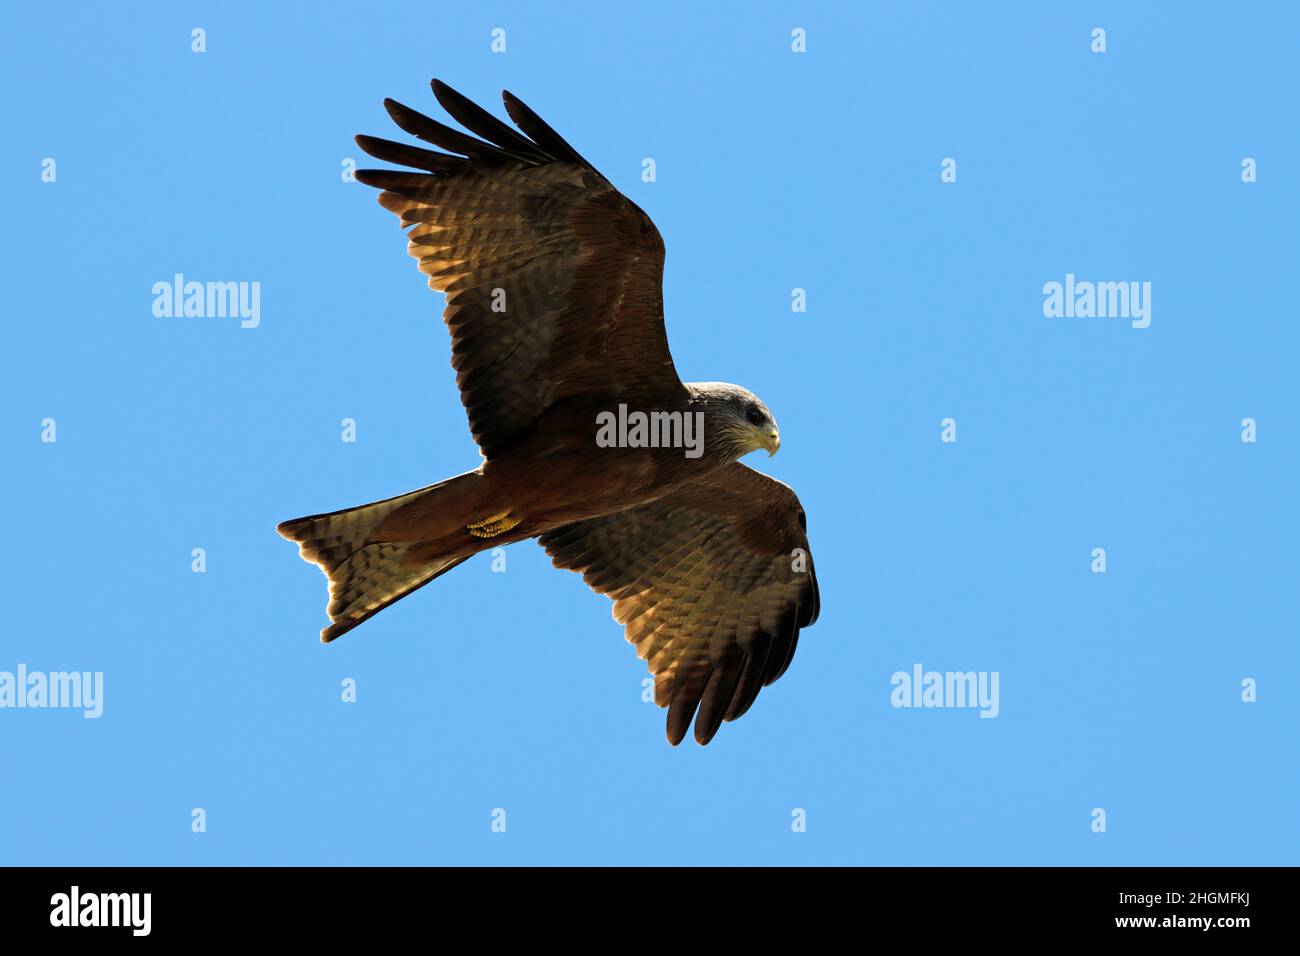 A yellow-billed kite (Milvus aegyptius) in flight against a clear blue sky, South Africa Stock Photo